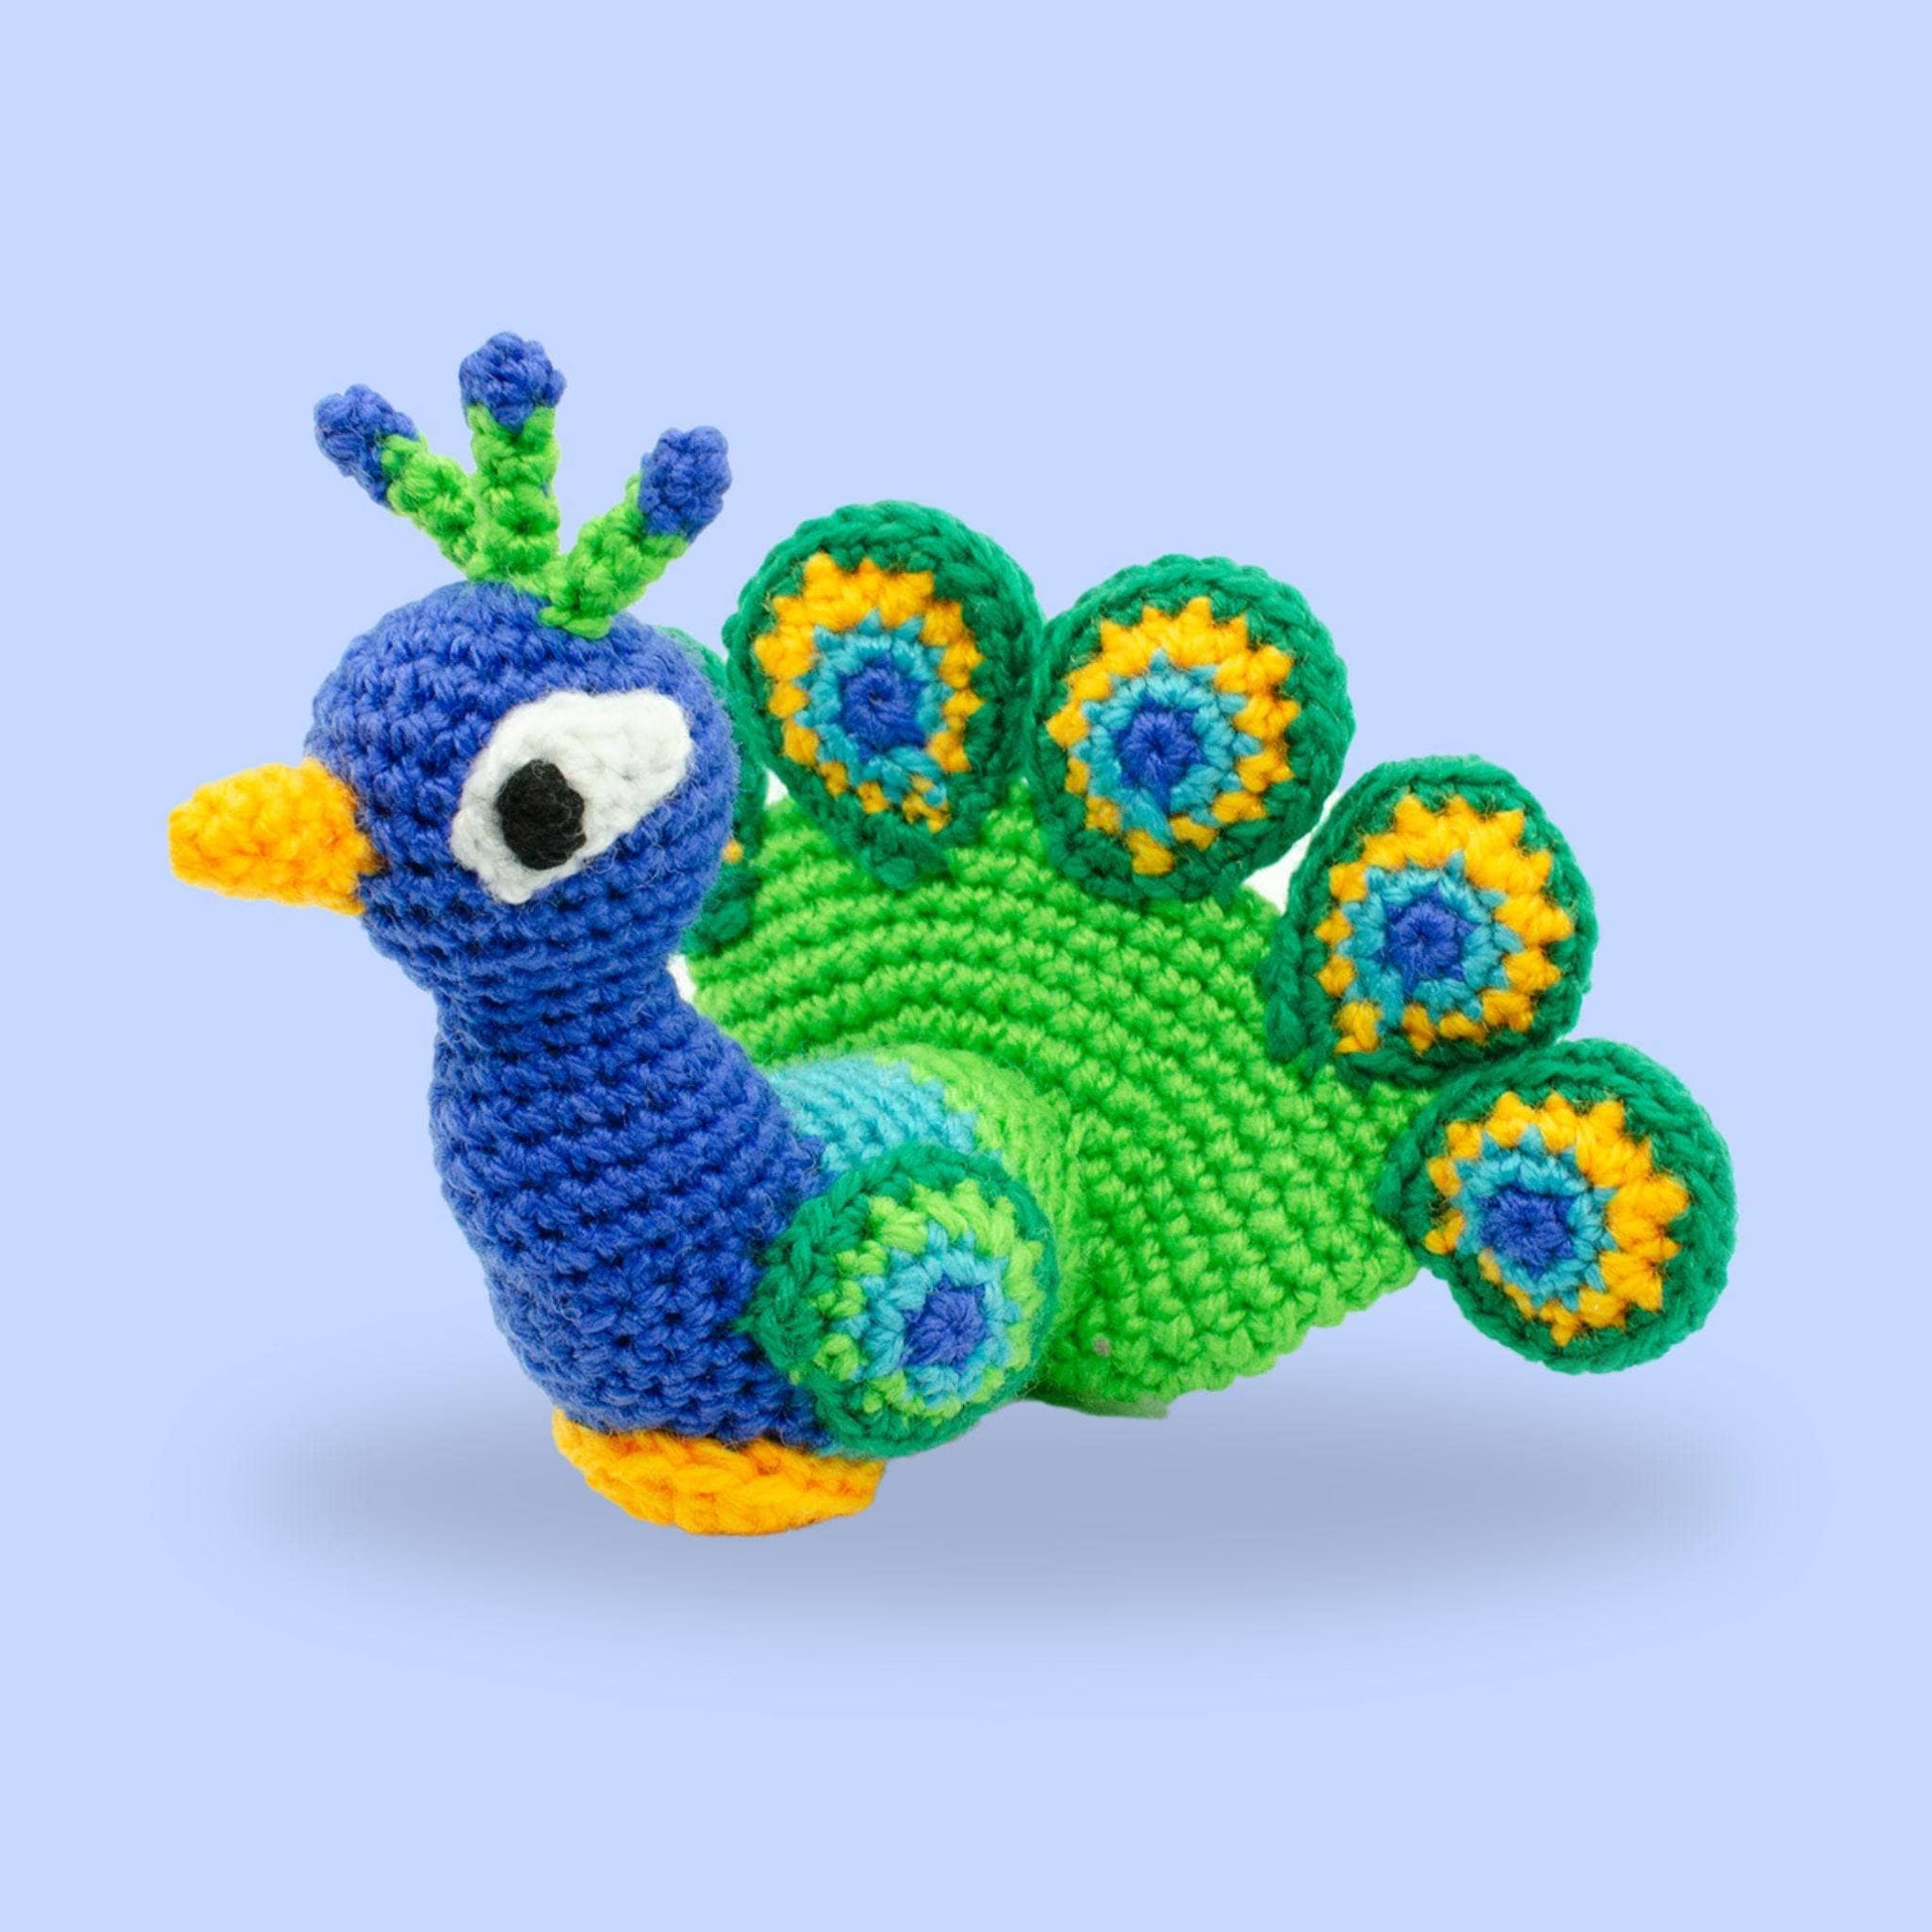 blue, green and yellow crochet peacock amigurumi on a purple background